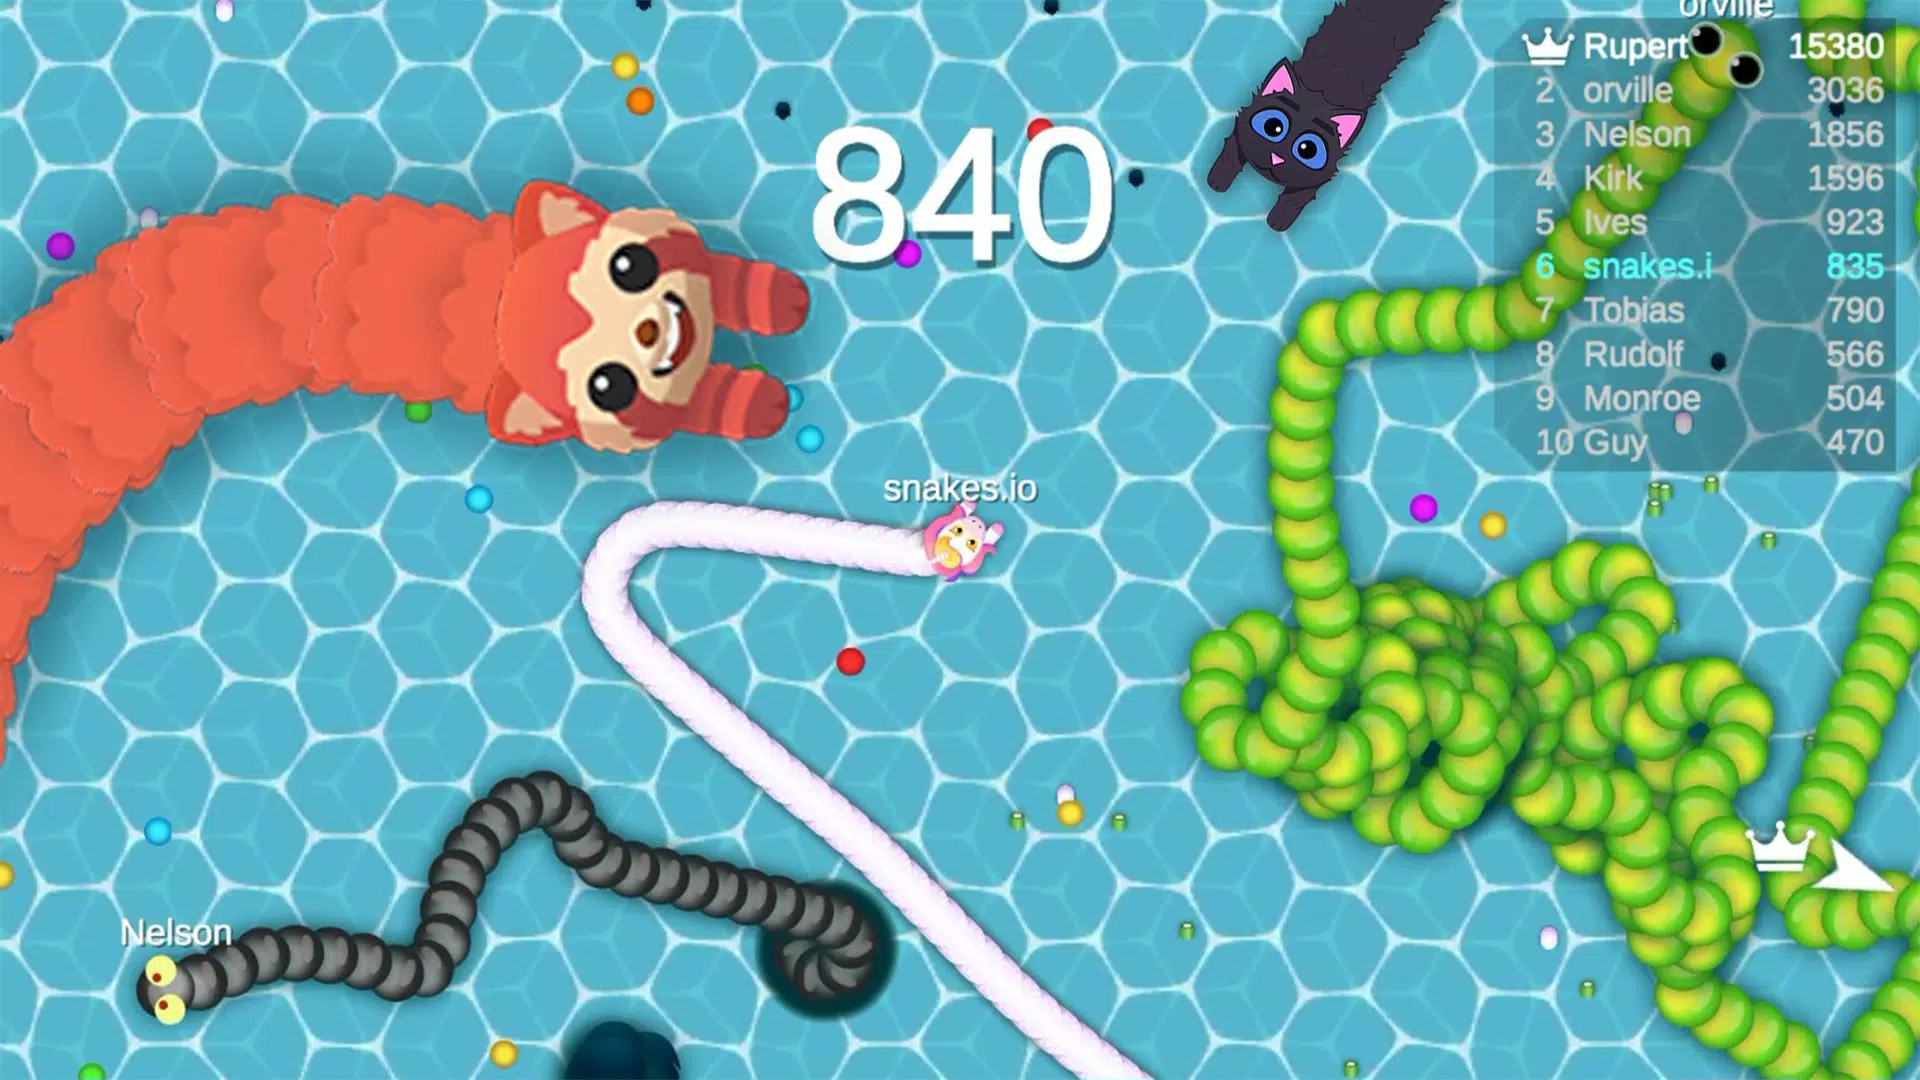 Snake.io A game filled with hours of fun! Free to download on the app